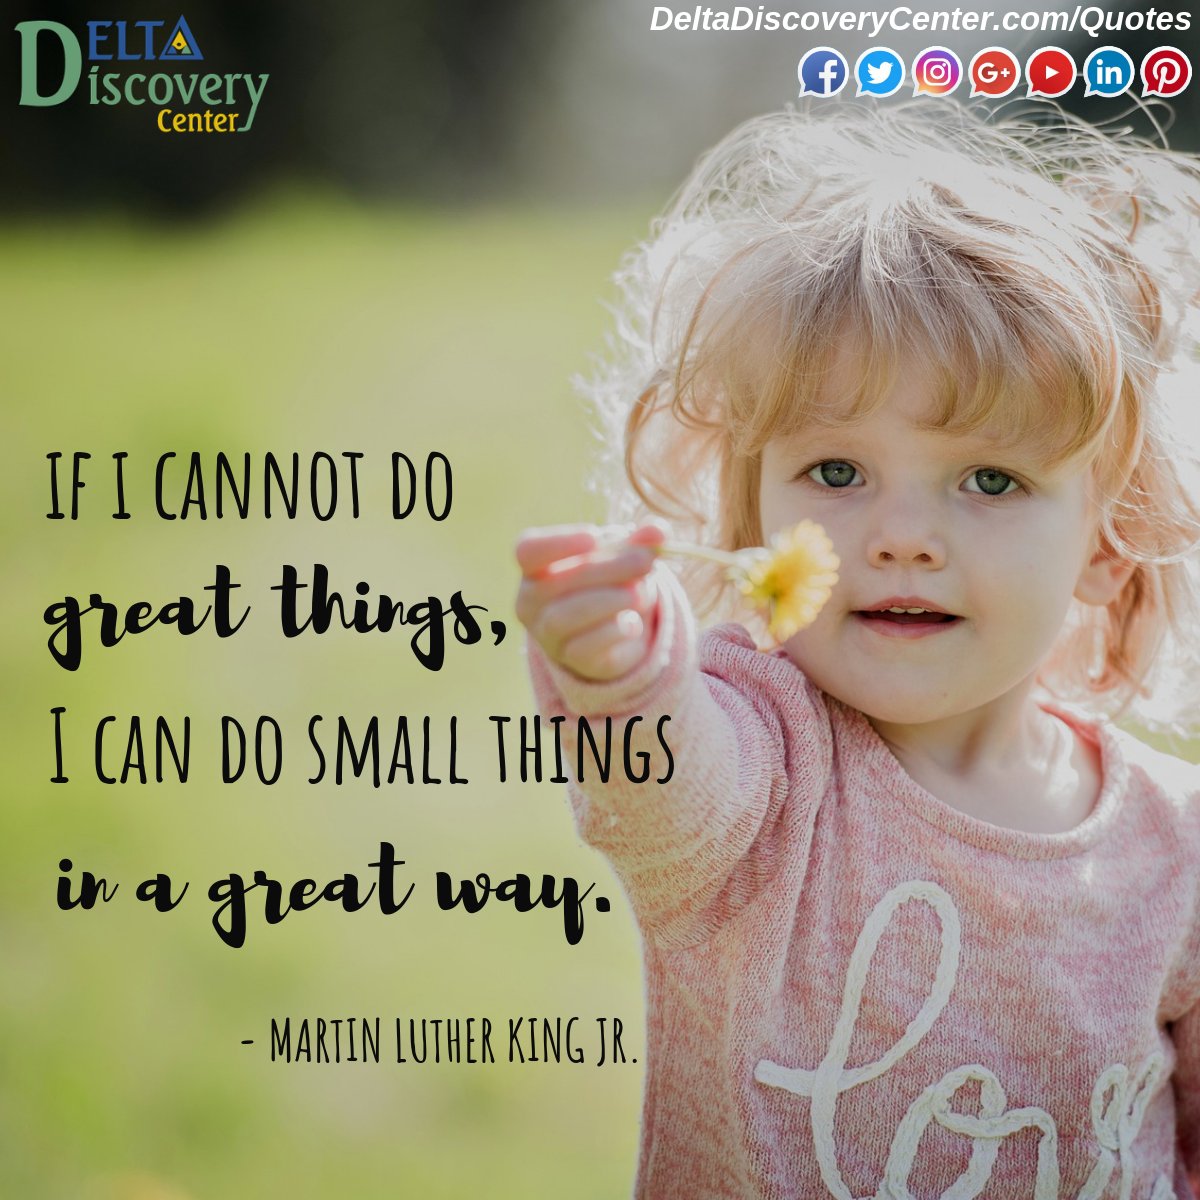 We don't always have to aim for great things. Even little things, just simple gestures, will go a long way. . . . . #positivethinking #smallsteps #motivationalquotes #inspirationalquotes #martinlutherking